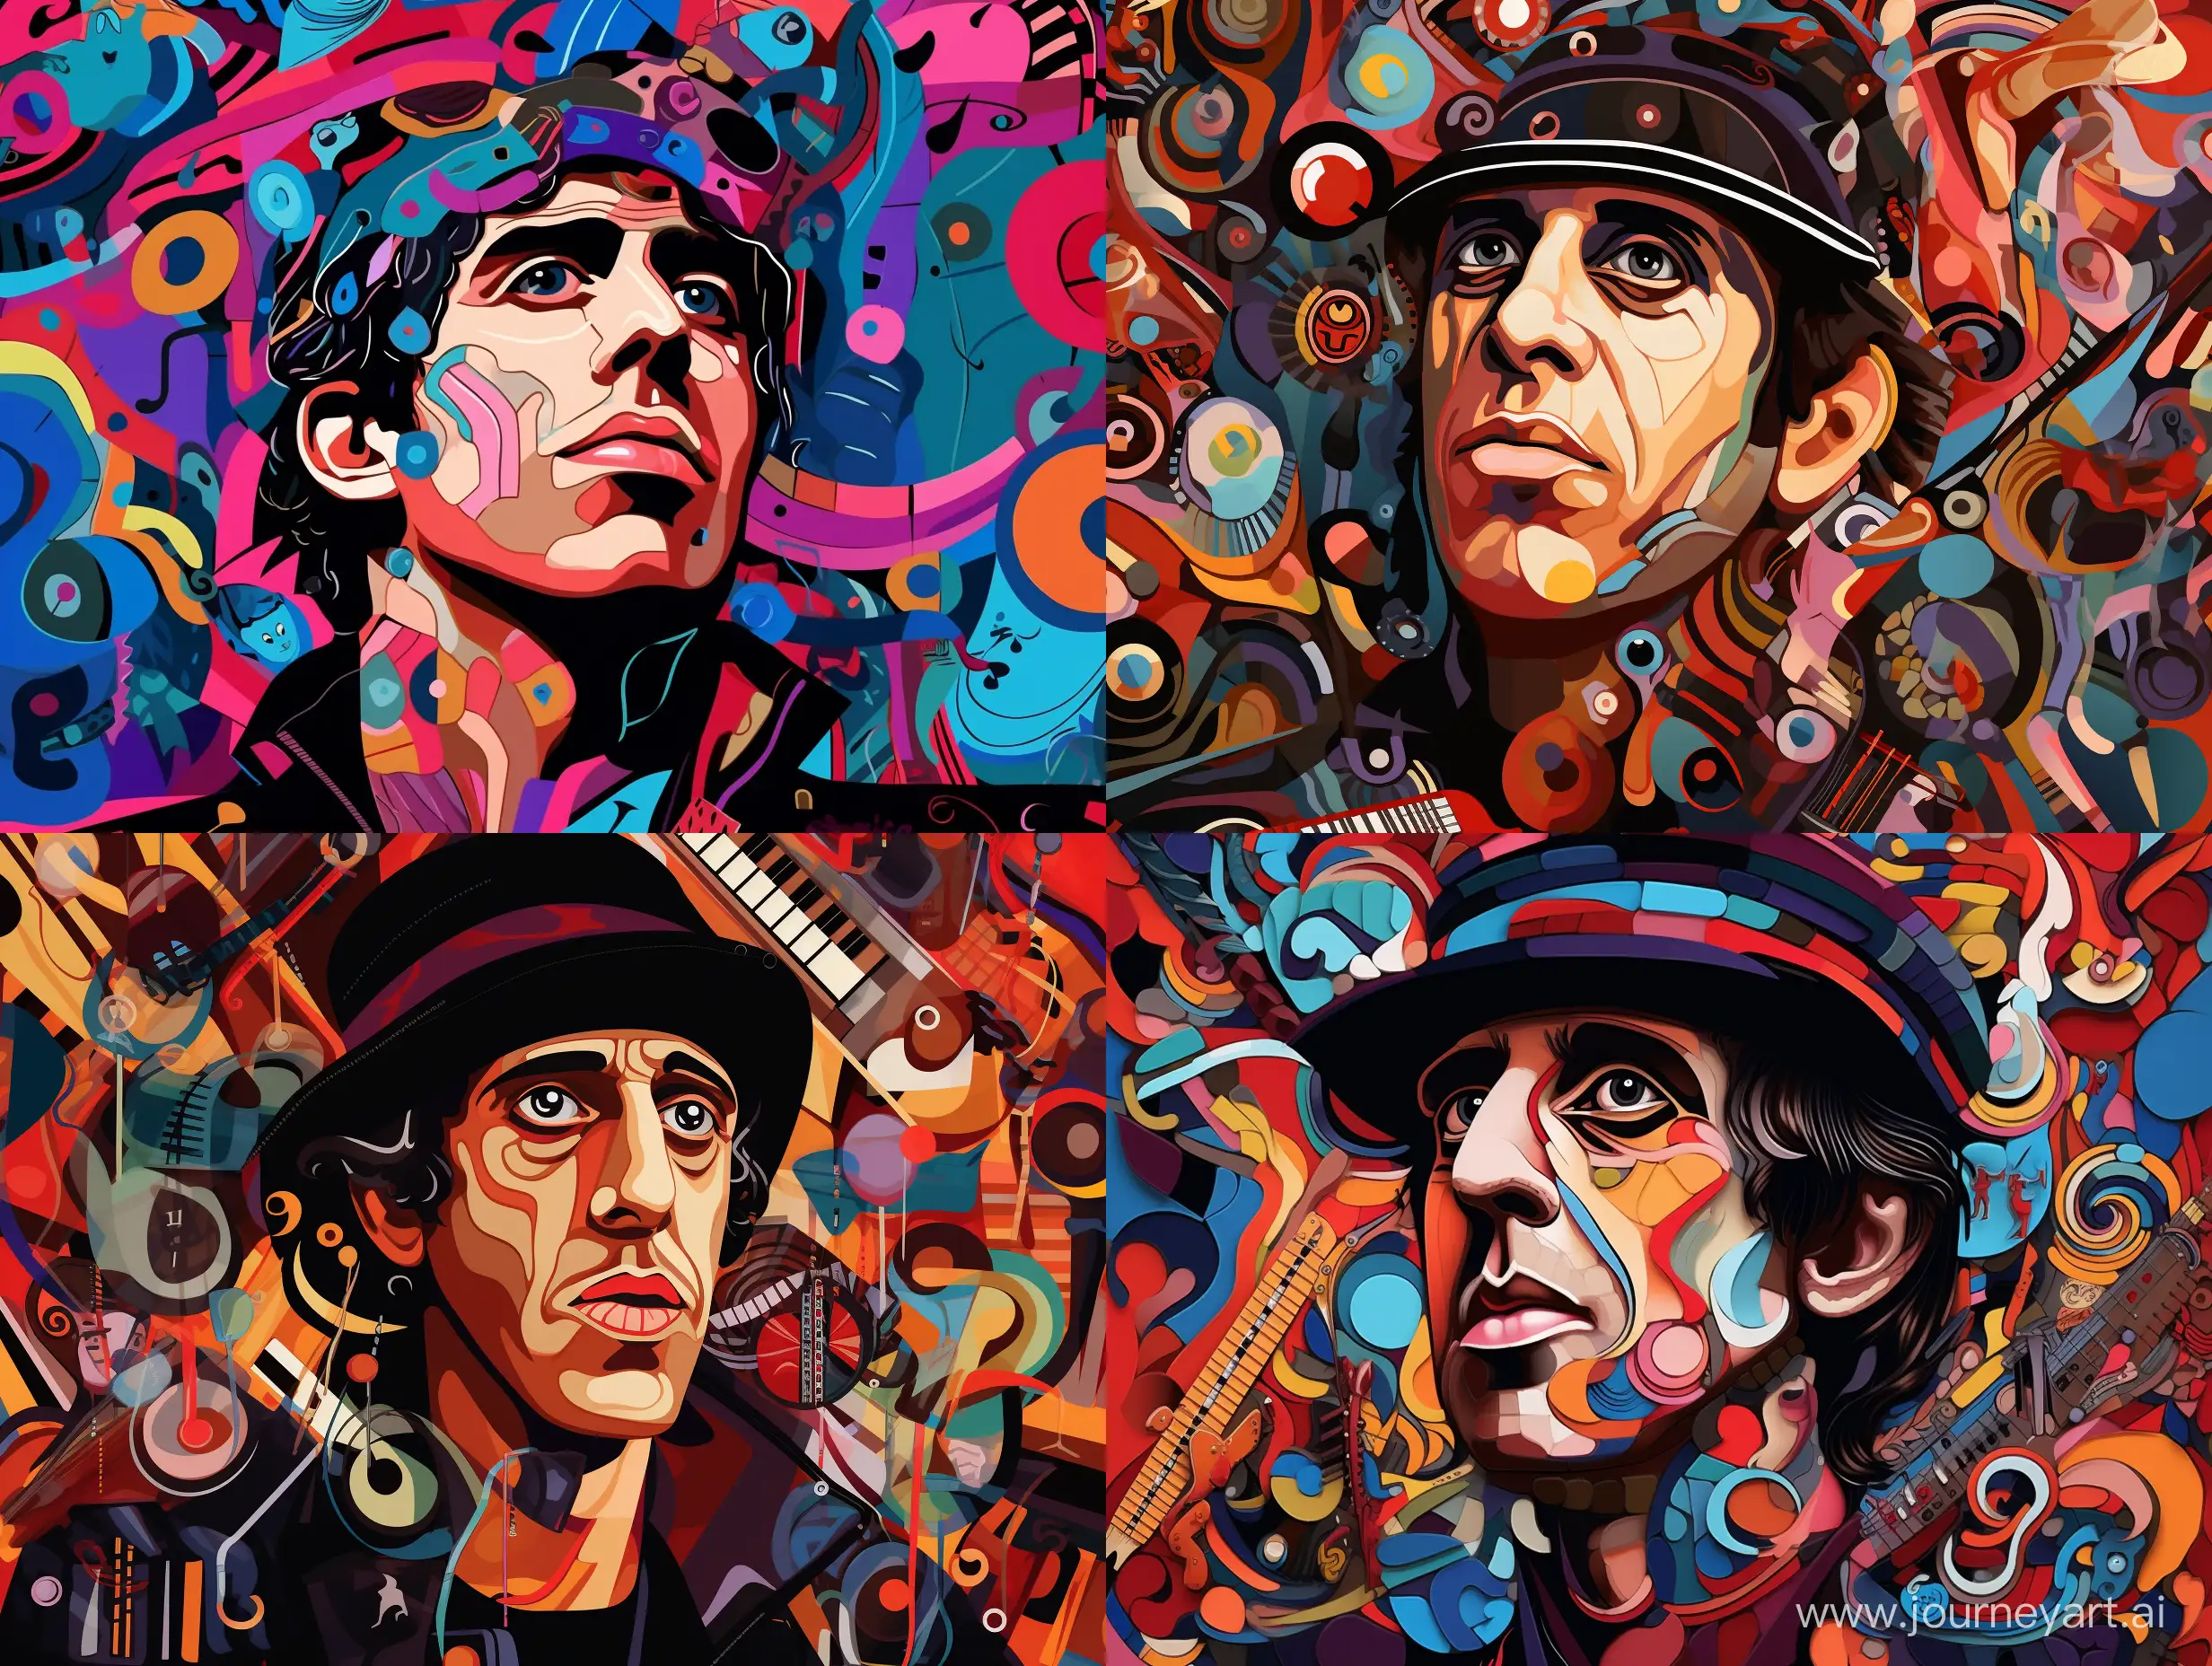 Waist portrait of Adriano Celentano, against a background of musical symbols, many details, complex colors, caricature, pop art style